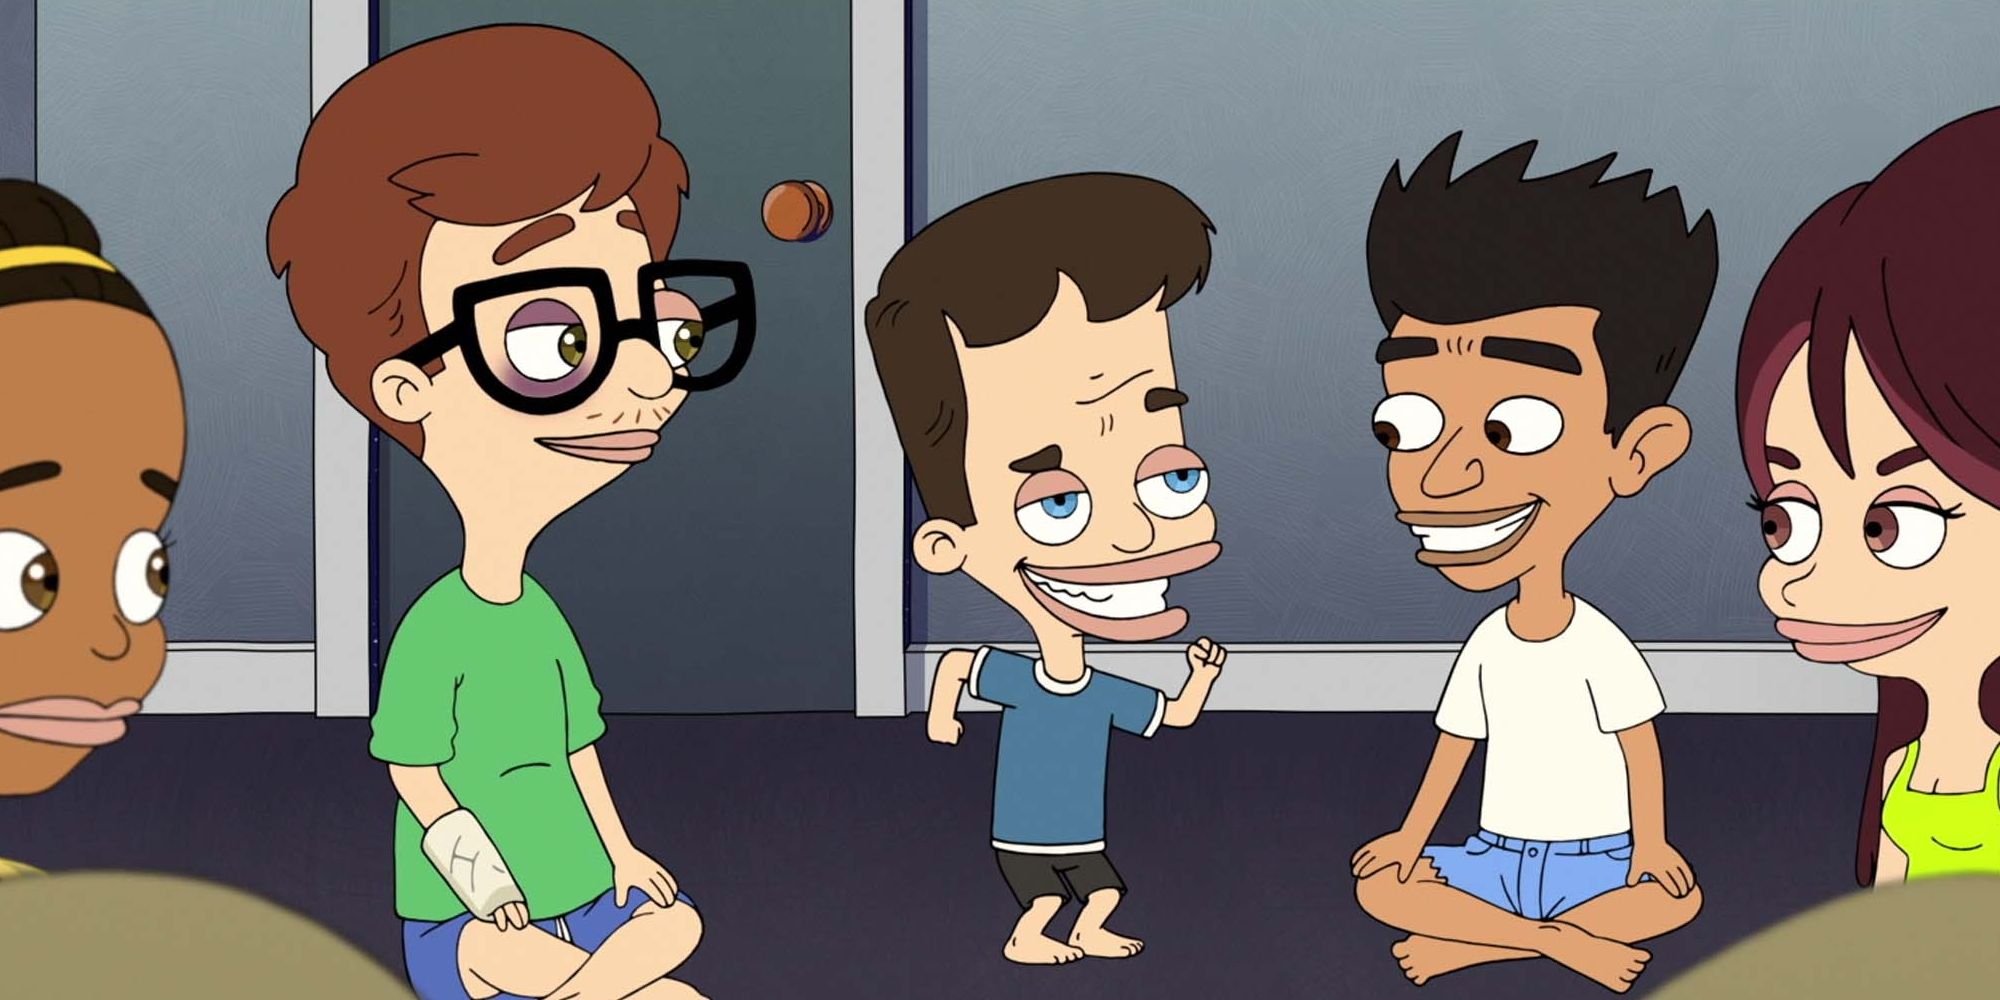 The main characters of Big Mouth sitting together in a circle.